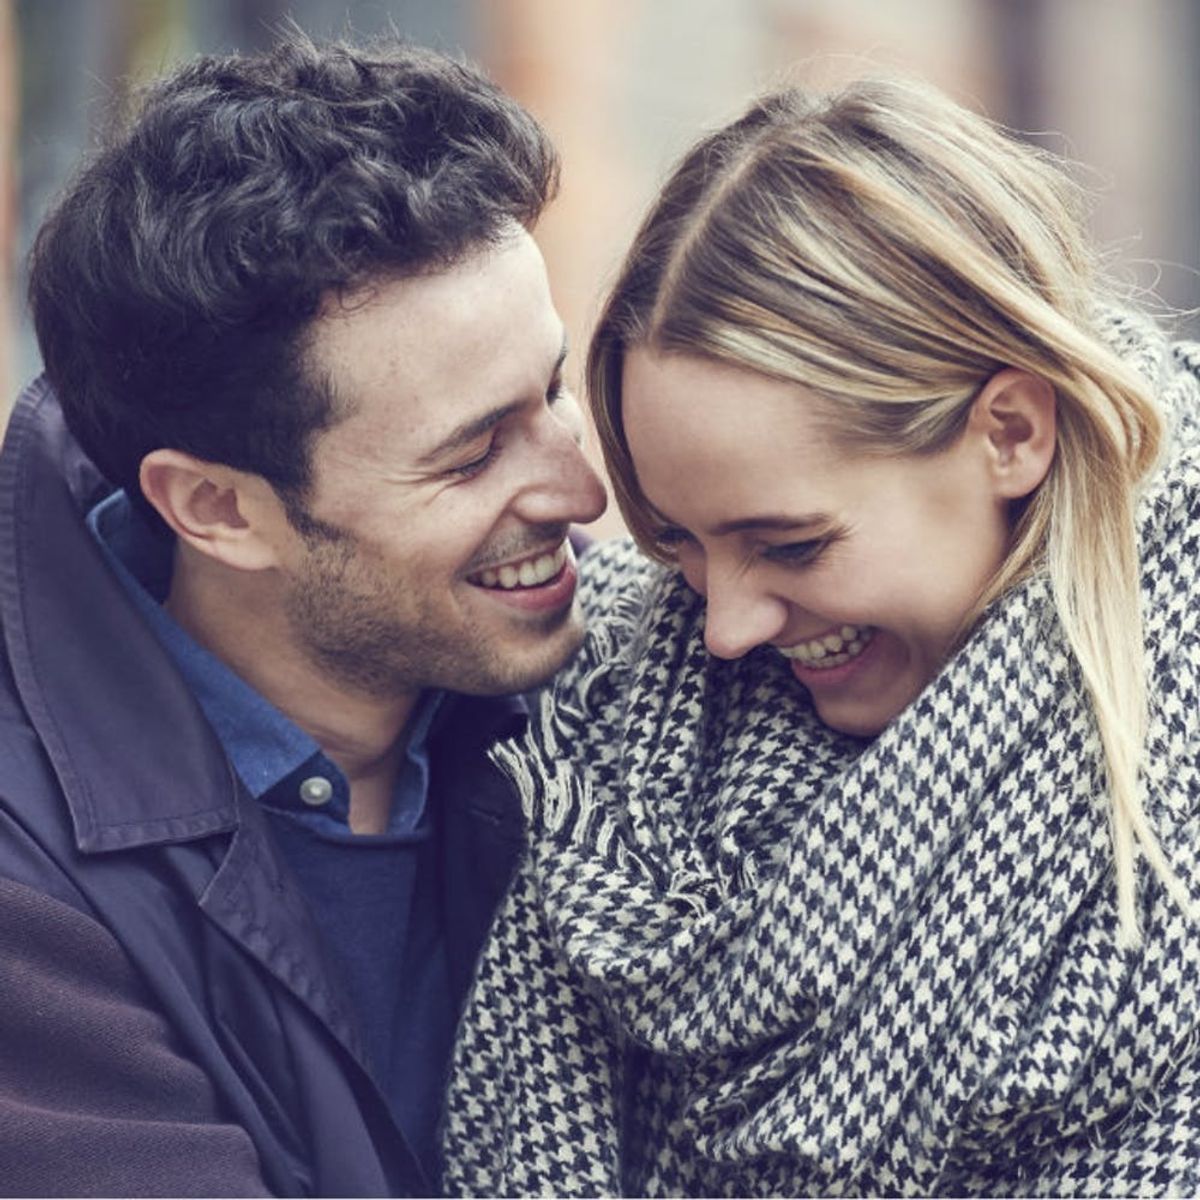 6 Ways to Keep the Romance Alive All Year Long